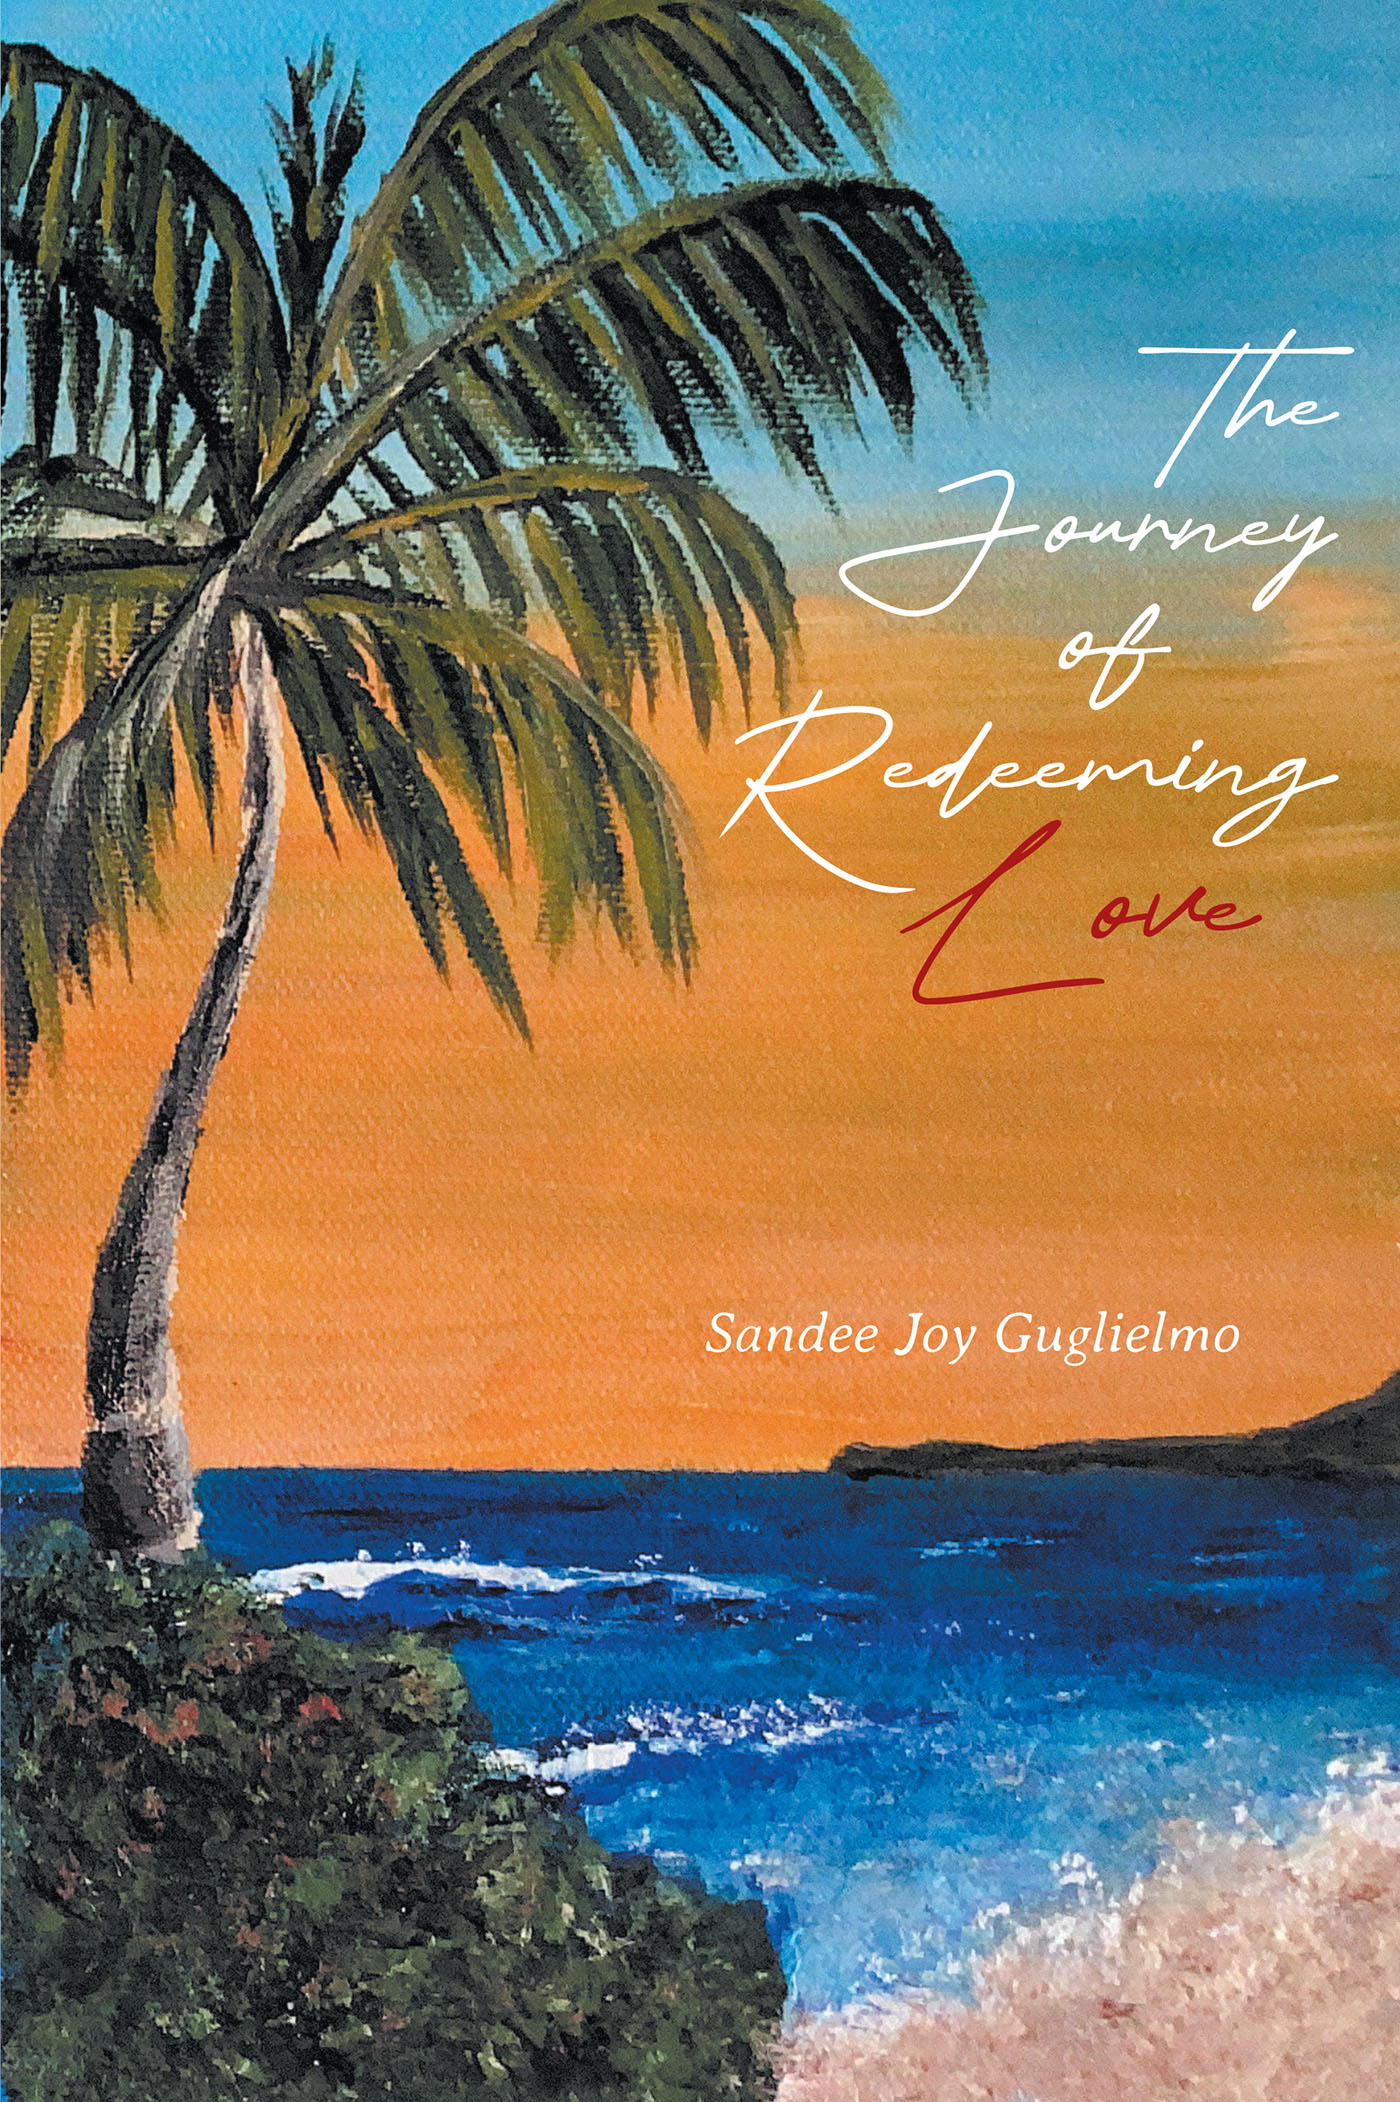 Sandee Joy Guglielmo’s Newly Released "The Journey of Redeeming Love" is an Encouraging Resource for a Rejuvenated Sense of Faith